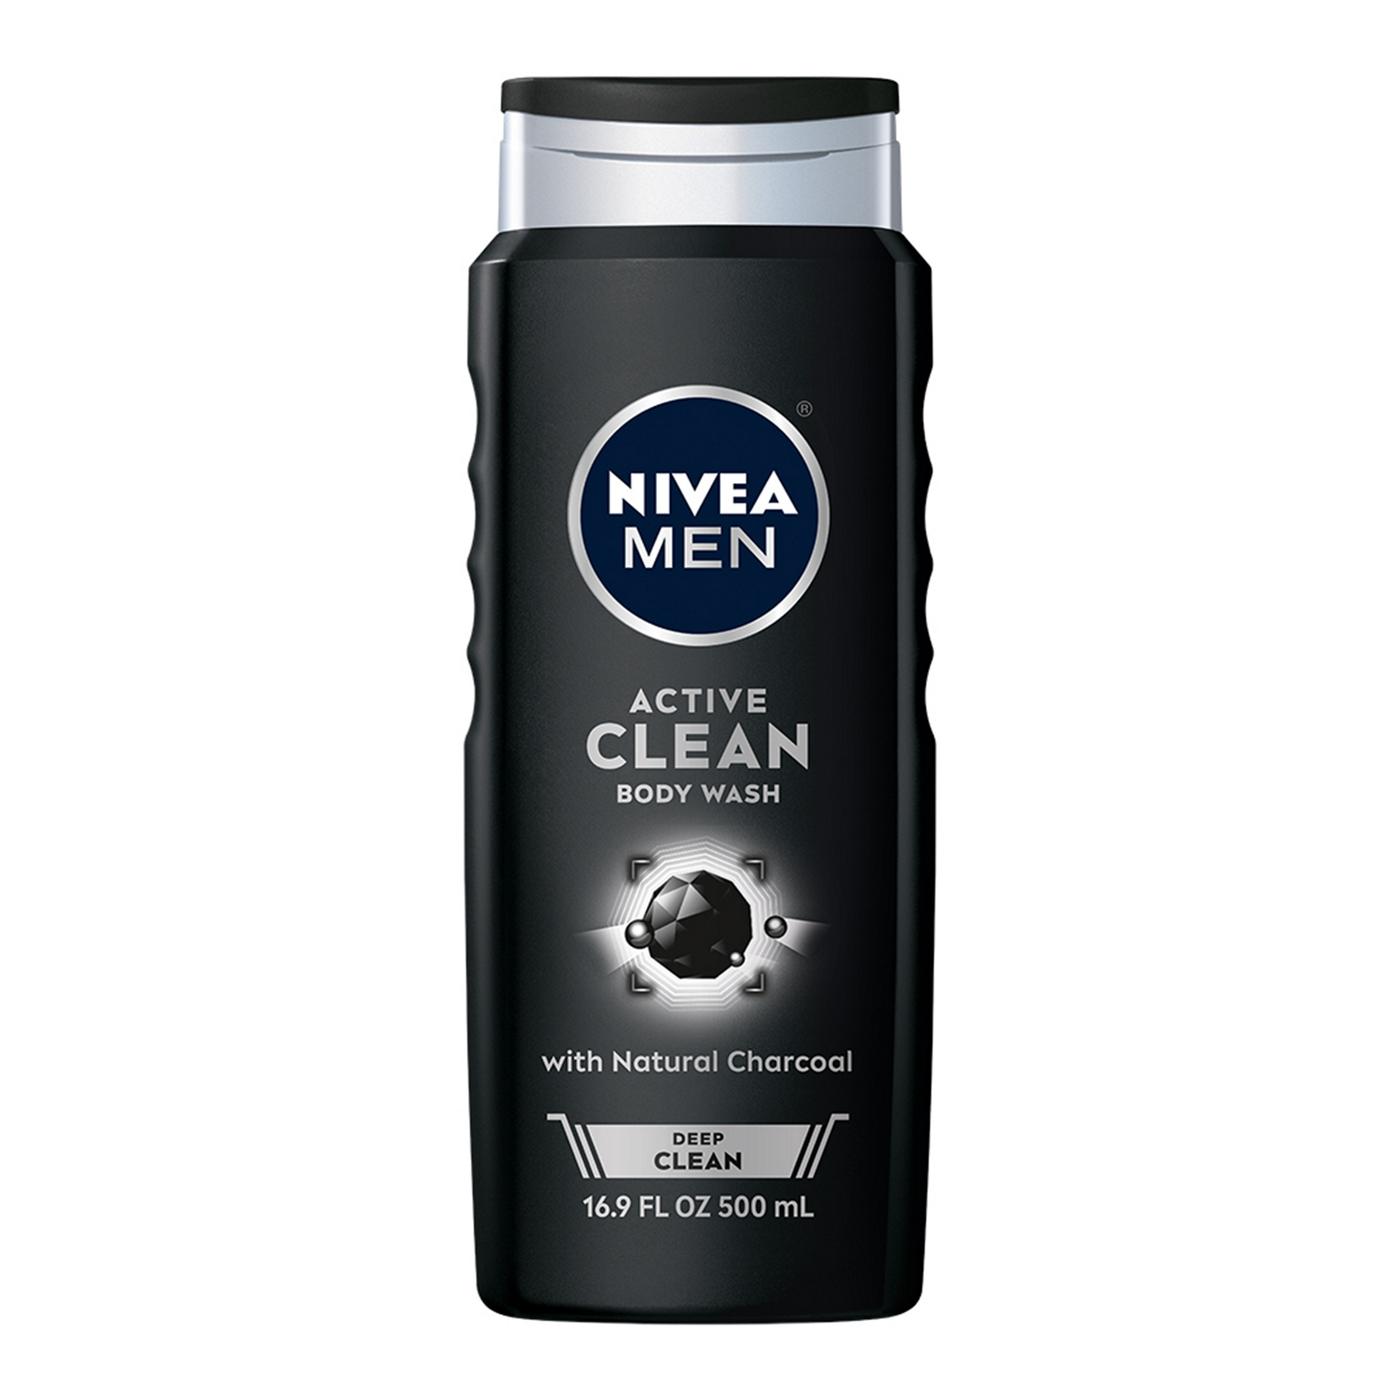 NIVEA Men Active Clean Body Wash with Natural Charcoal